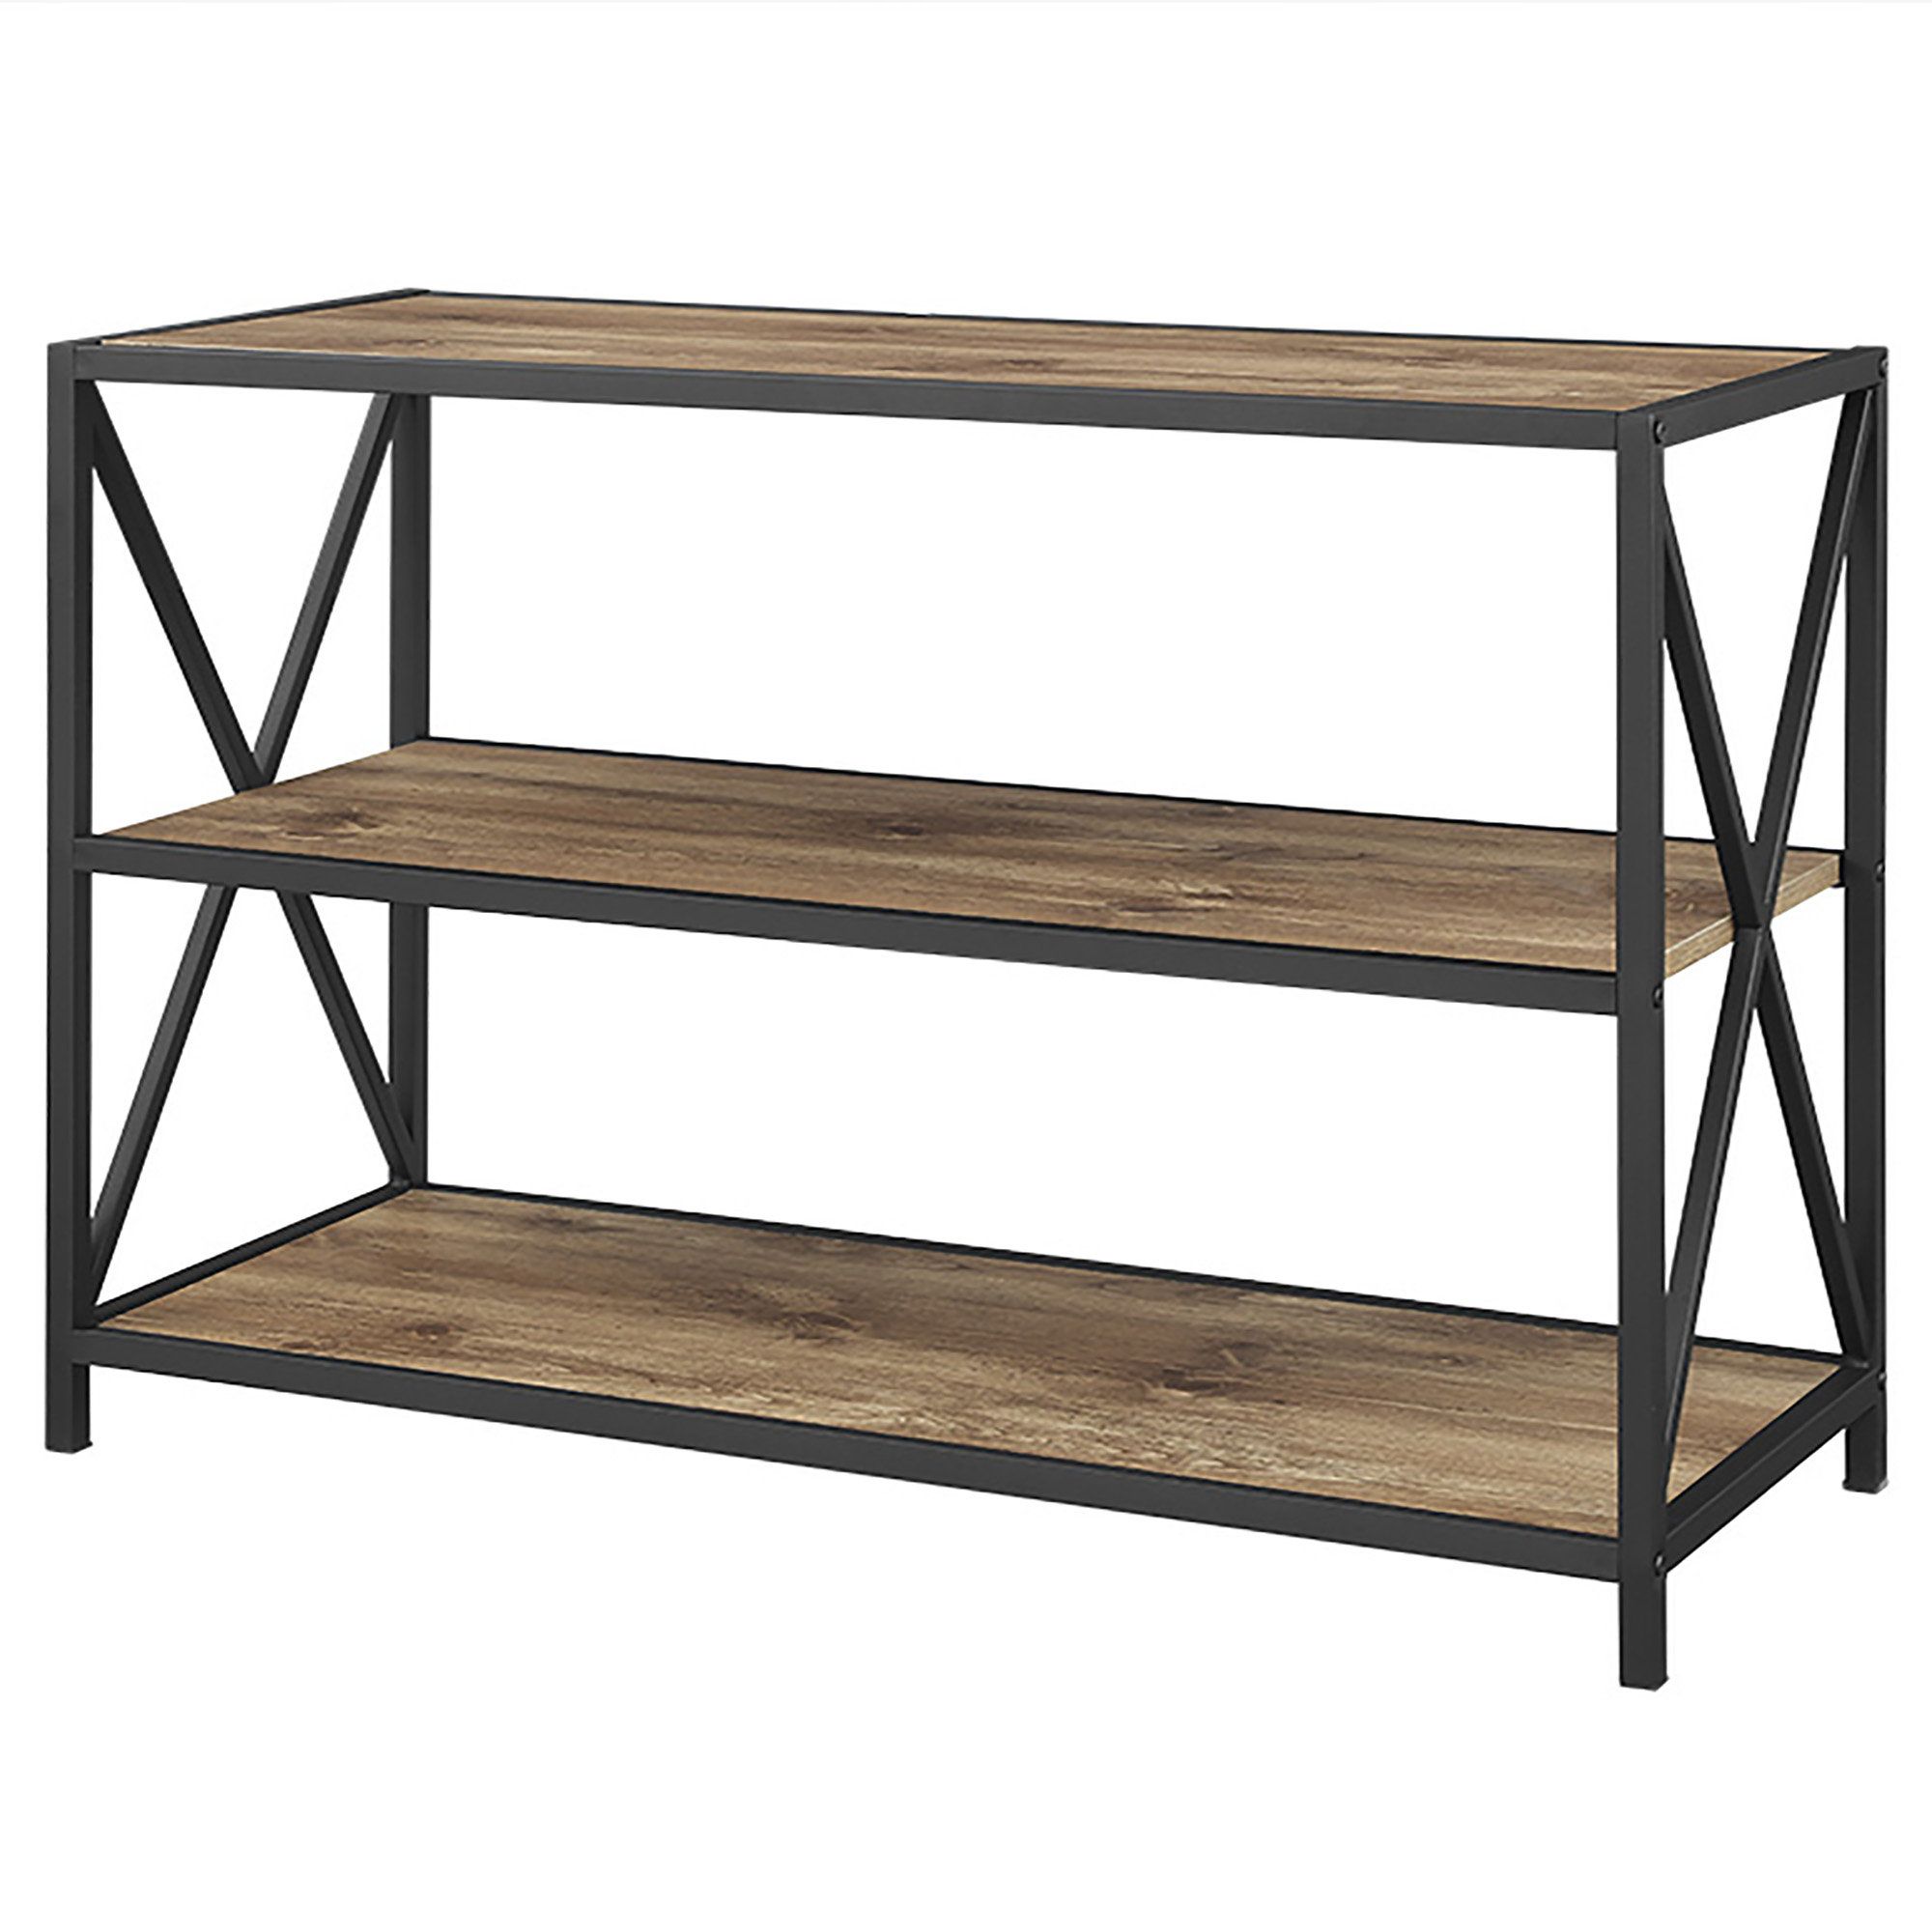 Adair Etagere Bookcase With 2020 Kettner Etagere Bookcases (View 5 of 20)